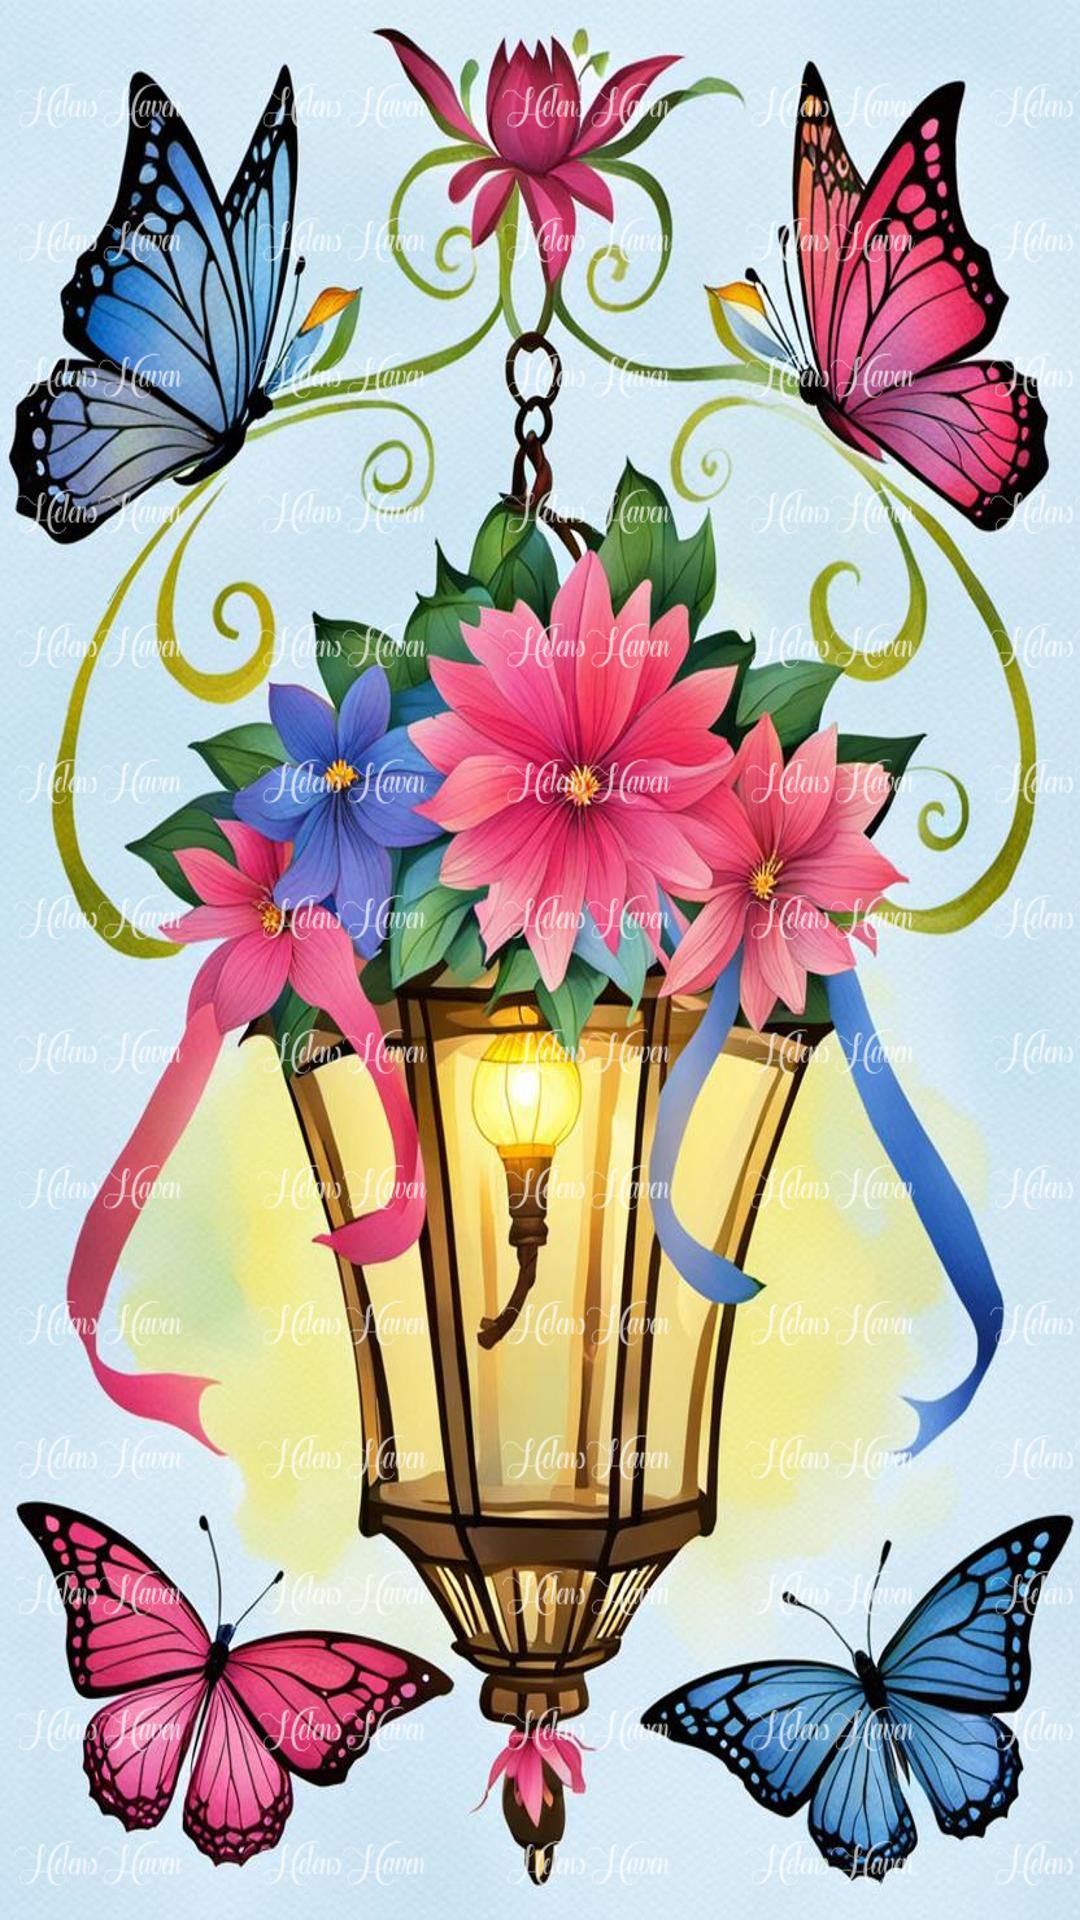 A lantern adorned with blue and pink flowers surrounded by blue and pink butterflies